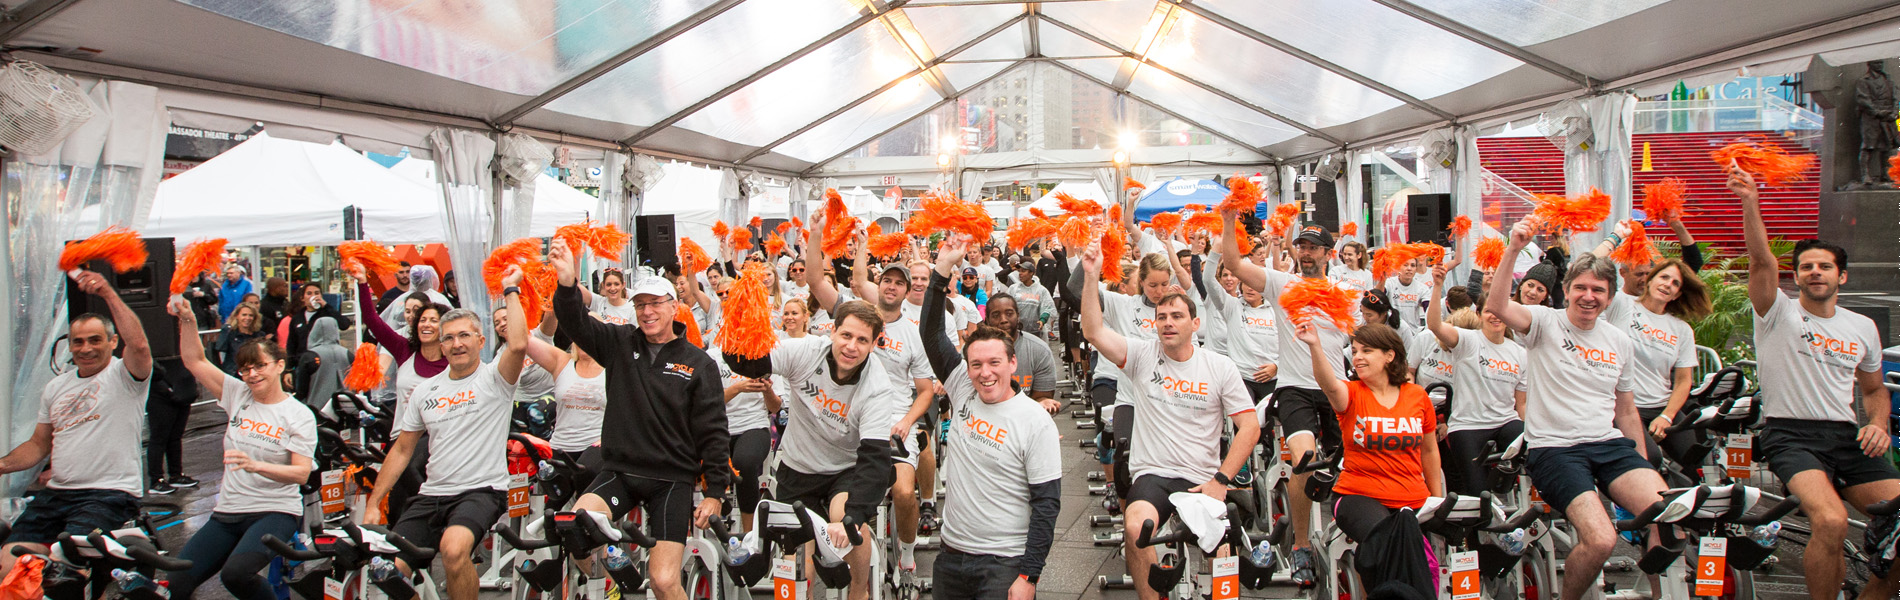 Cycle For Survival Launches 2017 Battle To Beat Rare Cancers Over 